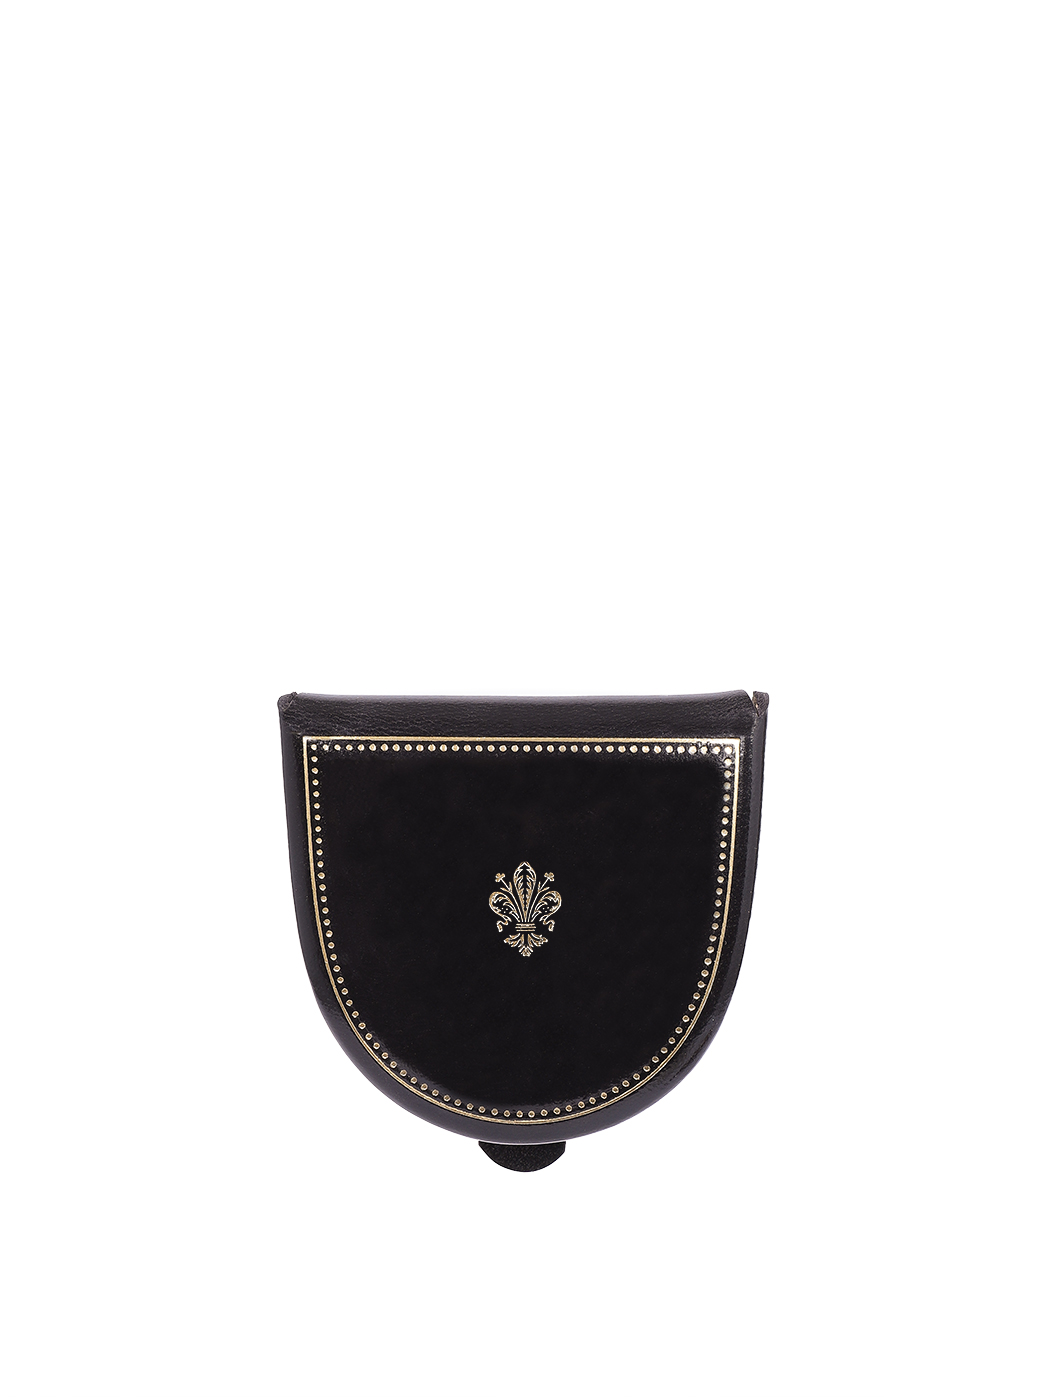 Florentine Lily Tacco Coin Pouch Black